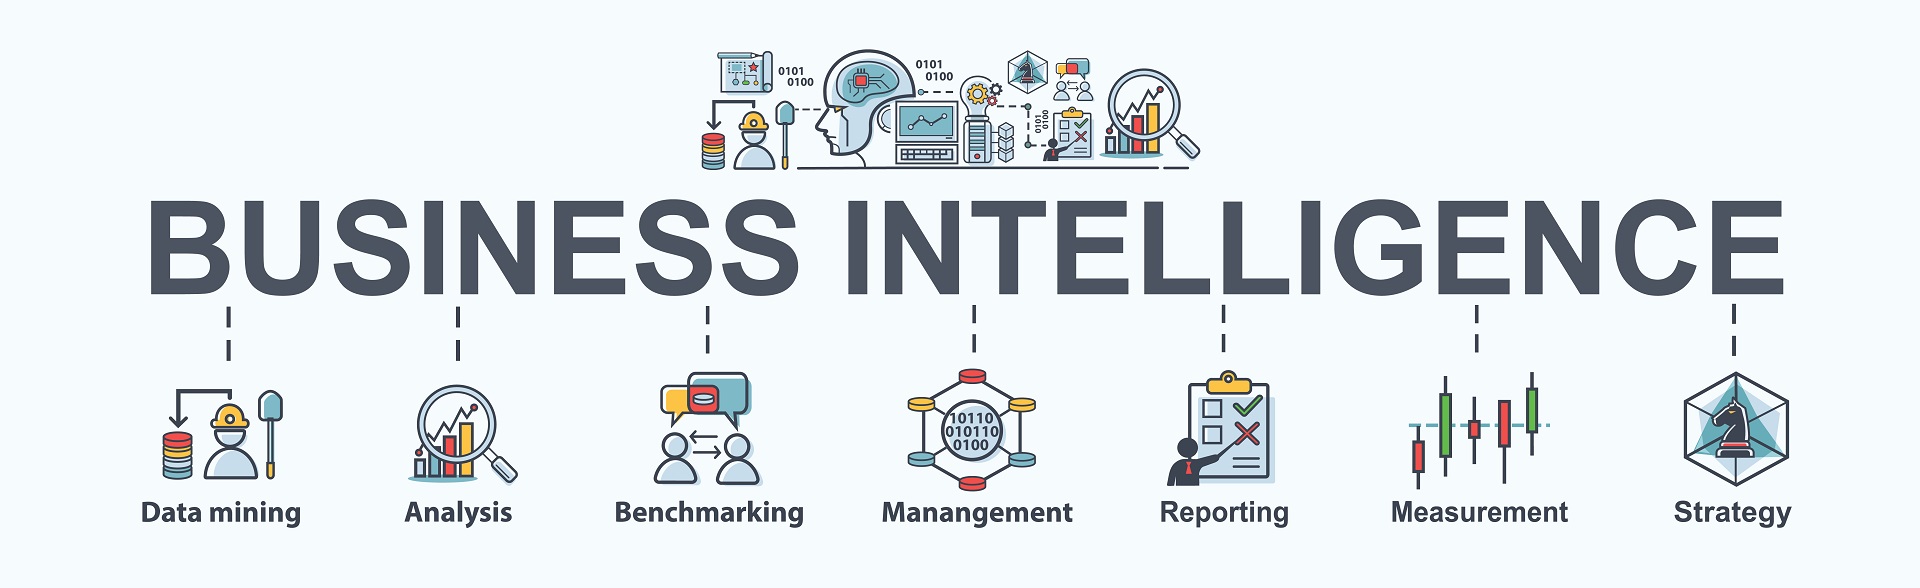 opsi report & scheduling business intelligence